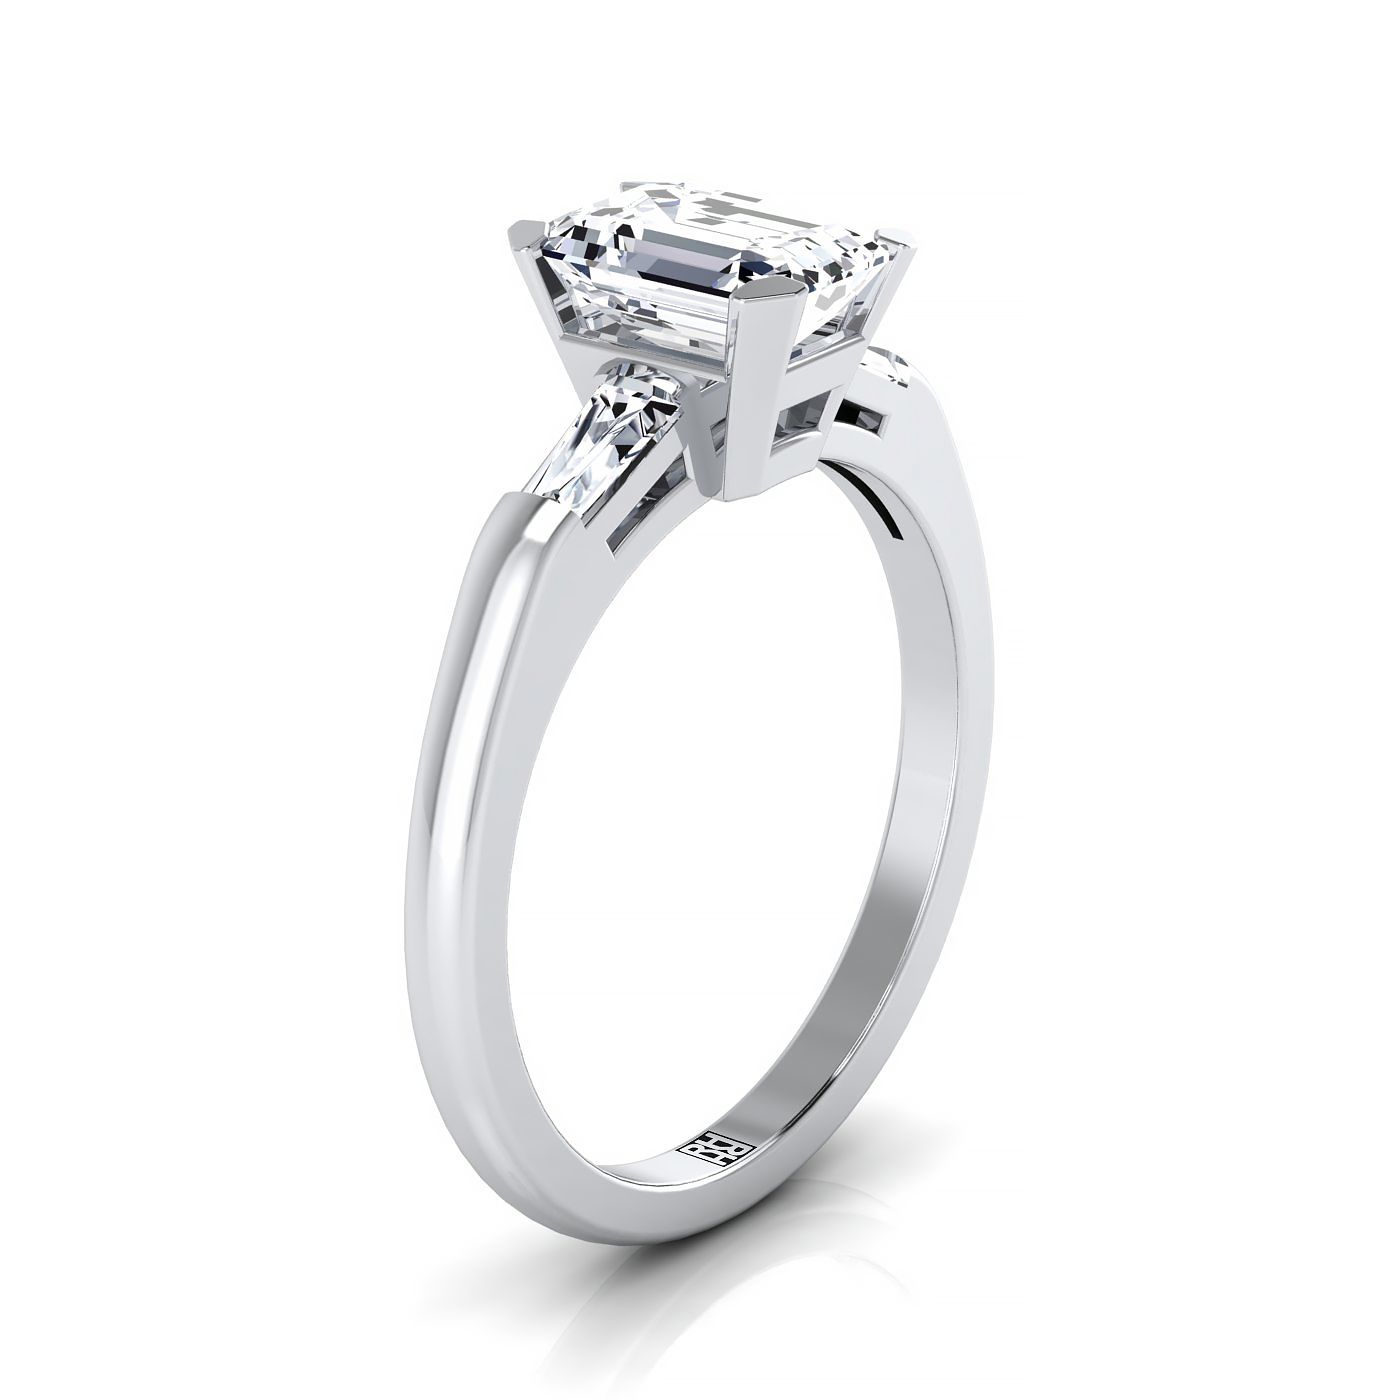 18K White Gold Emerald Cut Diamond Three Stone Tapered Baguette Engagement Ring -1/5ctw